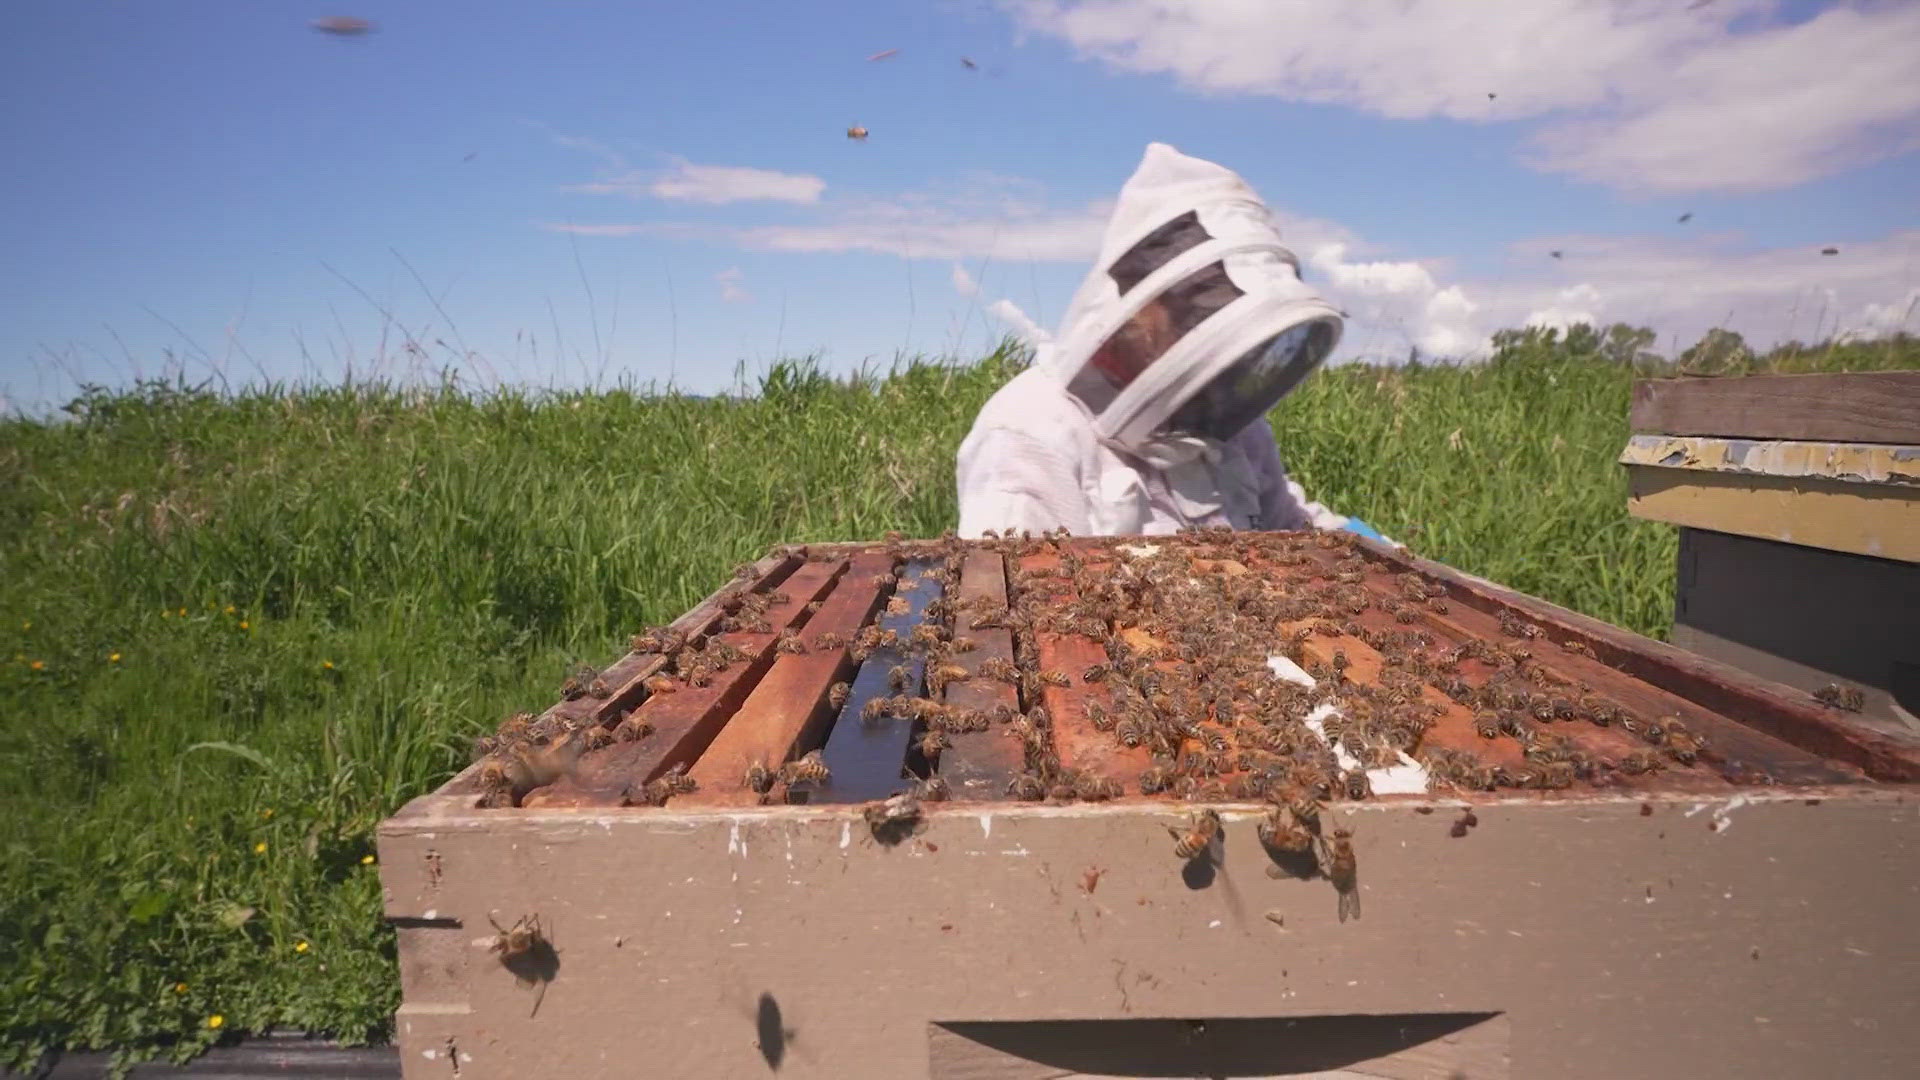 Beekeeper Dawn Beck says despite the challenges, caring for her hives is full of "bucolic" benefits.